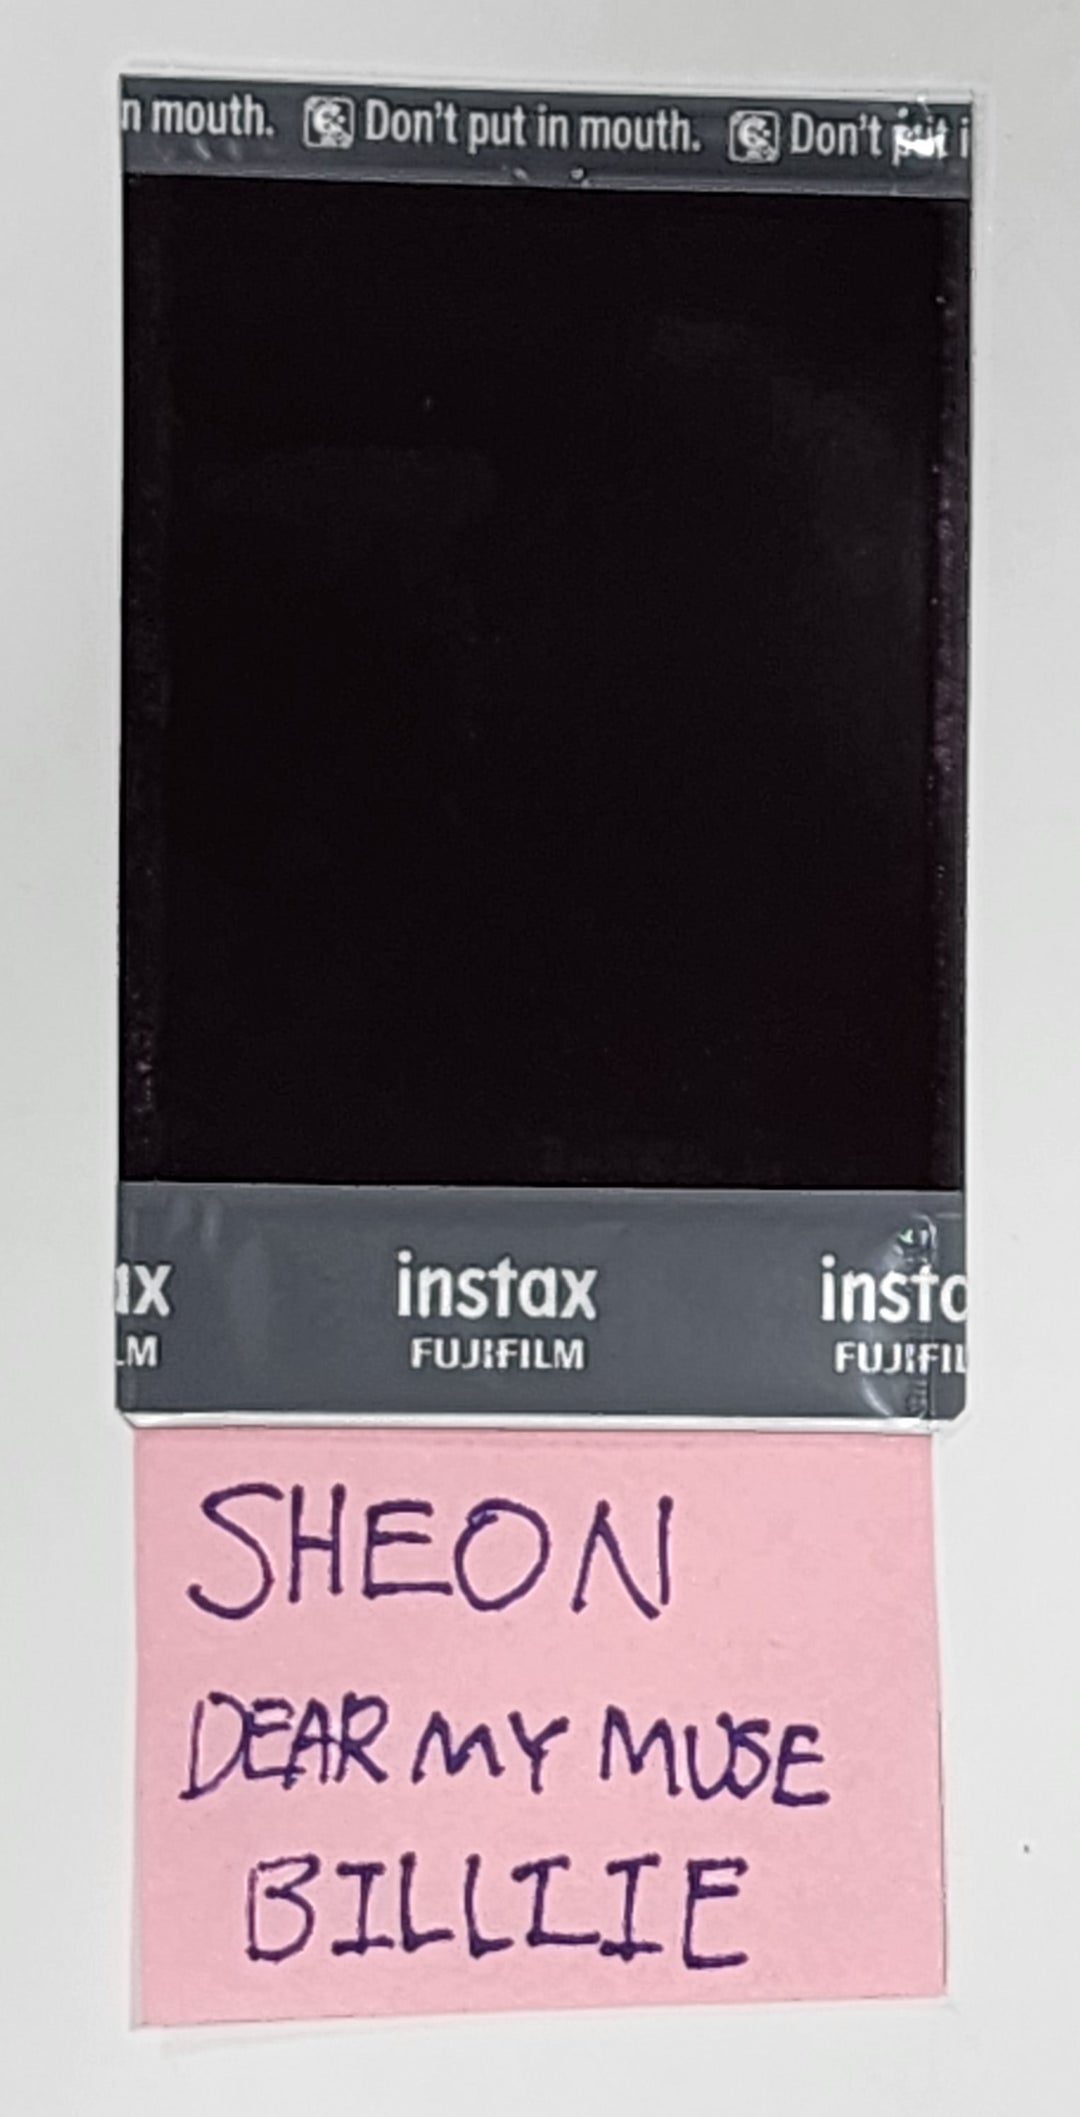 Sheon (of billlie) - Hand Autographed(Signed) Polaroid